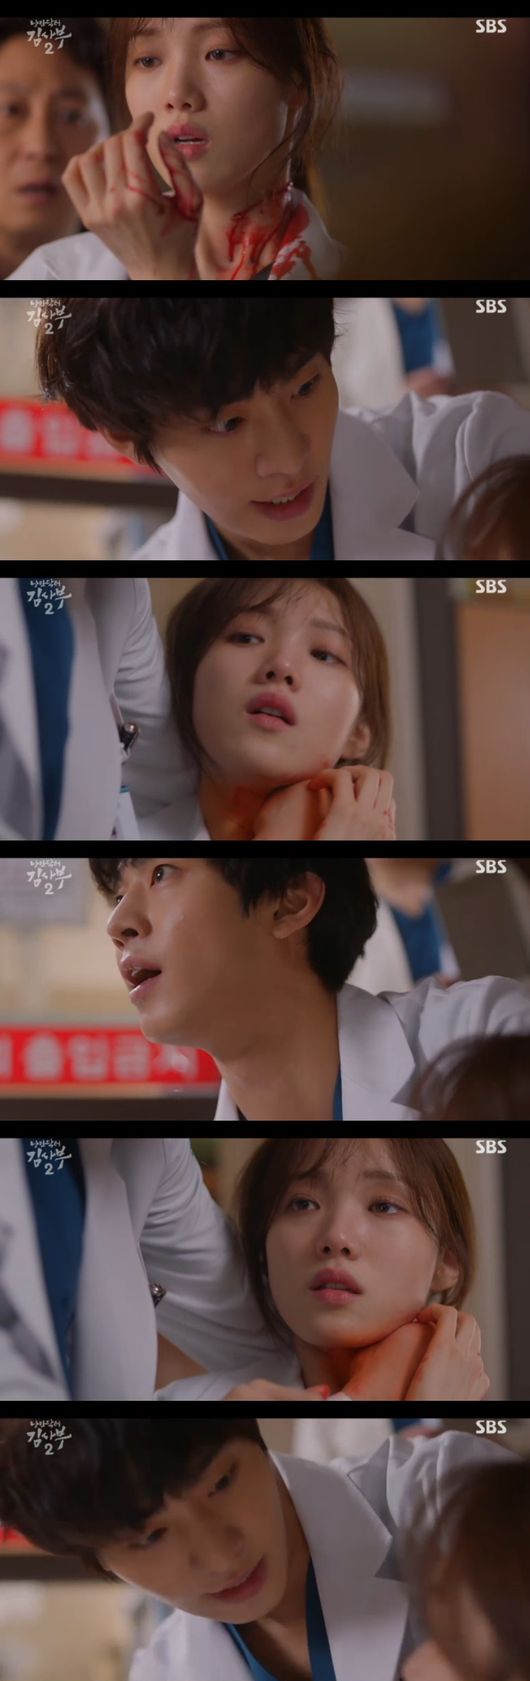 Lee Sung-kyung was in an unexpected accident in Romantic Doctor Kim Sabu Season 2 and was greeted by Danger.Can Ahn Hyo-seop save Lee Sung-kyung, who was stabbed in the neck and fell over-hemorrhage?Eun-jae (Lee Sung-kyung), who was hit by Danger due to excessive bleeding in the SBS monthly drama Romantic Doctor Kim Sabu Season 2 broadcast on the 21st, and Woojin (Ahn Hyo-seop), who jumped into the operating room to save such a silver, were announced.The emergency situation was unfolded at Doldam Hospital, where gangs with gunshot wounds gathered.Kim Sabu (Han Seok-gyu), who was in surgery, left the finishing to Woojin (Ahn Hyo-seop), and Cha Eun-jae (Lee Sung-kyung) was busy with the gangsters surgery.In the situation where the number of doctors was insufficient, the gang called Kim Sabu only, and the gang called for Kim Sabu, and the gangsters called Blackmail - Cinémix Par Chloé.Kim Sabu appeared in the situation where the gangsters and the Detectives struggled, and overpowered them. They raised their voices to the gangsters as this is a hospital, and the gangsters bowed their heads.Jang Gi-tae (Im Won-hee) arranged the Detectives and gangsters in the middle and took order.Kim Sabu directly identified the patients with gunshot wounds. At this time, an emergency situation was unfolded, and Cha Eun-jae also conveyed the situation to Kim Sabu and was enthusiastic about treatment.Jung In-soo (Yoon Na-moo) and Yoon-ae (Soo Ju-yeon) also helped him to treat the disease next to Kim Sa-bu.At this time, Park Min-guk (Kim Joo-heon) appeared in the operating room and ordered Kim Sa-bu to stop the operation.Kim said, I should move to the operating room soon, but the Republic of Korea said, Do you really have to go to surgery?I said, Take care of the patient who can not use his hand already, and take care of the patient who can save it at that time. Kim ignored this and ordered the patient to move to the operating room, and instructed him to prevent the bleeding of the patient only until he moved the operating room.Eun-jae, with the trust of his master, shouted, I can do it.The gang suddenly appeared to the silver, saying, If anything happens to my brother, then you die and I die. Blackmail - Cinémix Par Chloé.Eun-jae held his fist and performed the surgery in a spleen manner, saying, Beware.I was worried that Kim Sabu could do it, said Eun Jae. I am afraid of Professor Park Min-guk, but my shooter at Doldam Hospital is Kim Sabu and now Kim Sabu are the first.While all of them were nervous and watching, Eunjae prayed that he was please. Kim Sabu, who was in the process of other surgery, believed that Eunjae would do it to the end.Eun Jae has undergone a difficult opening surgery, and Eun Jae has successfully completed the surgery, saying, I think it will be.Kim Sabu praised Eun Jae as good, and Eun Jae was delighted with his confident appearance, saying, If I do it, I do not have any trouble.After the surgery, the gangsters came suddenly, and thanked the boss who saved him, saying, Thank you.In the past, Eun-jae recalled memories with Bae Moon-jung (Shin Dong-wook), a senior at school.Bae Moon-jung told Eun-jae, When do you want to buy a cup of rice? And Eun-jae showed a thrill to such a boat.Woojin went back to the patient who had traumatized him, saving him with the responsibility and obligation of being a doctor, but the patient said, Why did you save me?Woojin said, If you die like this, you will not know what you have done. Stick with your family, do not laugh, do not wield violence against powerless children and kill them, do not excuse your life, you are just a weak and bad person.He said, I am sick and sick for a lifetime, so I will pay for it, so it will be fair to the dead child.The gangs came back to Doldam Hospital and visited Woojin, who followed them in a car the next day after sneaking behind Woojin, who was working out the morning.At the same time, the silver that drove out the morning walk, the moment the gang tried to hit Woojin by car, the silver saved Woojin from the amazing timing.Eun-jae noticed the strange aura and noticed that it was a gangster who came to Woojin.Asked Woojin if he was receiving Blackmail – Cinémix Par Chloé, he said he saw the gangs doing Blackmail – Cinémix Par Chloé.Eunjae told Ushijima the Loan Shark vendors to report to the police, but Woojin turned around saying, Its not your business.Eun-jae was worried, This is a criminal act, do I do it for you?Woojin looked at such silver and asked, Do you like me? Or do not go out, I will do my job, and I will do my job. Woojin has been suffering endlessly from the Ushijima the Loan Shark who keep on the phone and Blackmail – Cinémix Par Chloé.She witnessed the families of the patients who had wielded domestic violence. She pushed the silver into the fire.The victim, who was domestically violent, looked at her husband and raised a Carter knife, and the silver that dried it was attacked by a knife.A silver that fell down with a lot of blood from his neck, and Woojin rushed to find such a silver, immediately instructed him to treat and informed him of the emergency.Romantic Doctor Kim Sabu 2 captures the broadcast screen